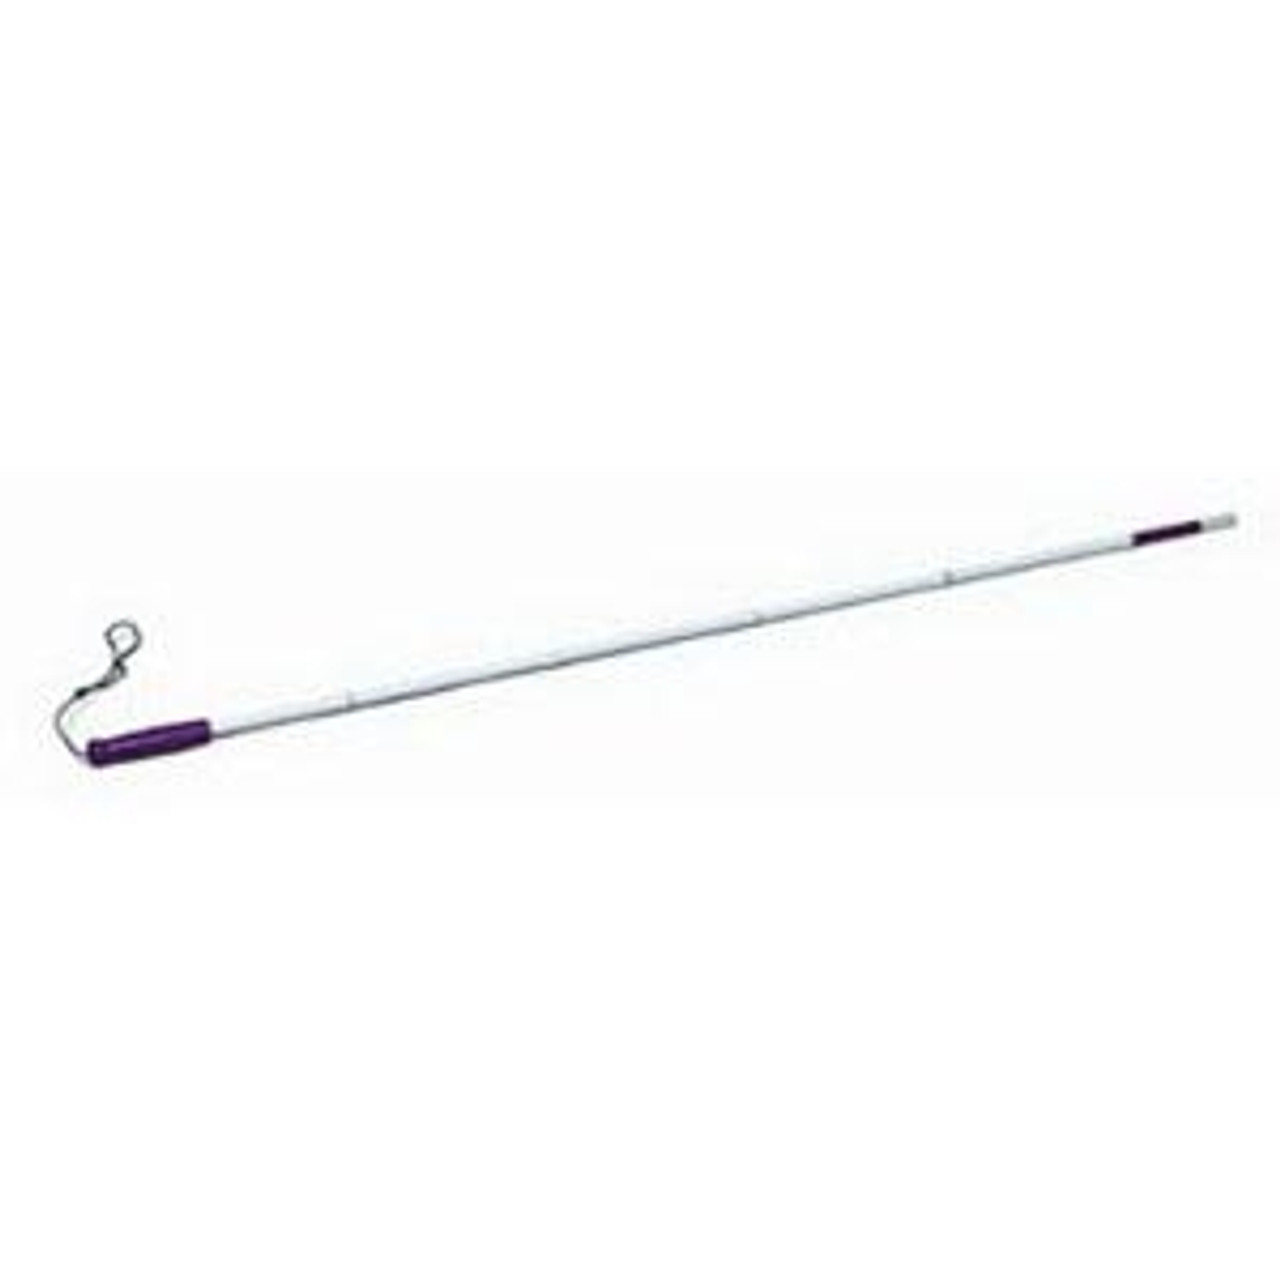 Folding Cane with Putter-style Handle, Vinyl Grip